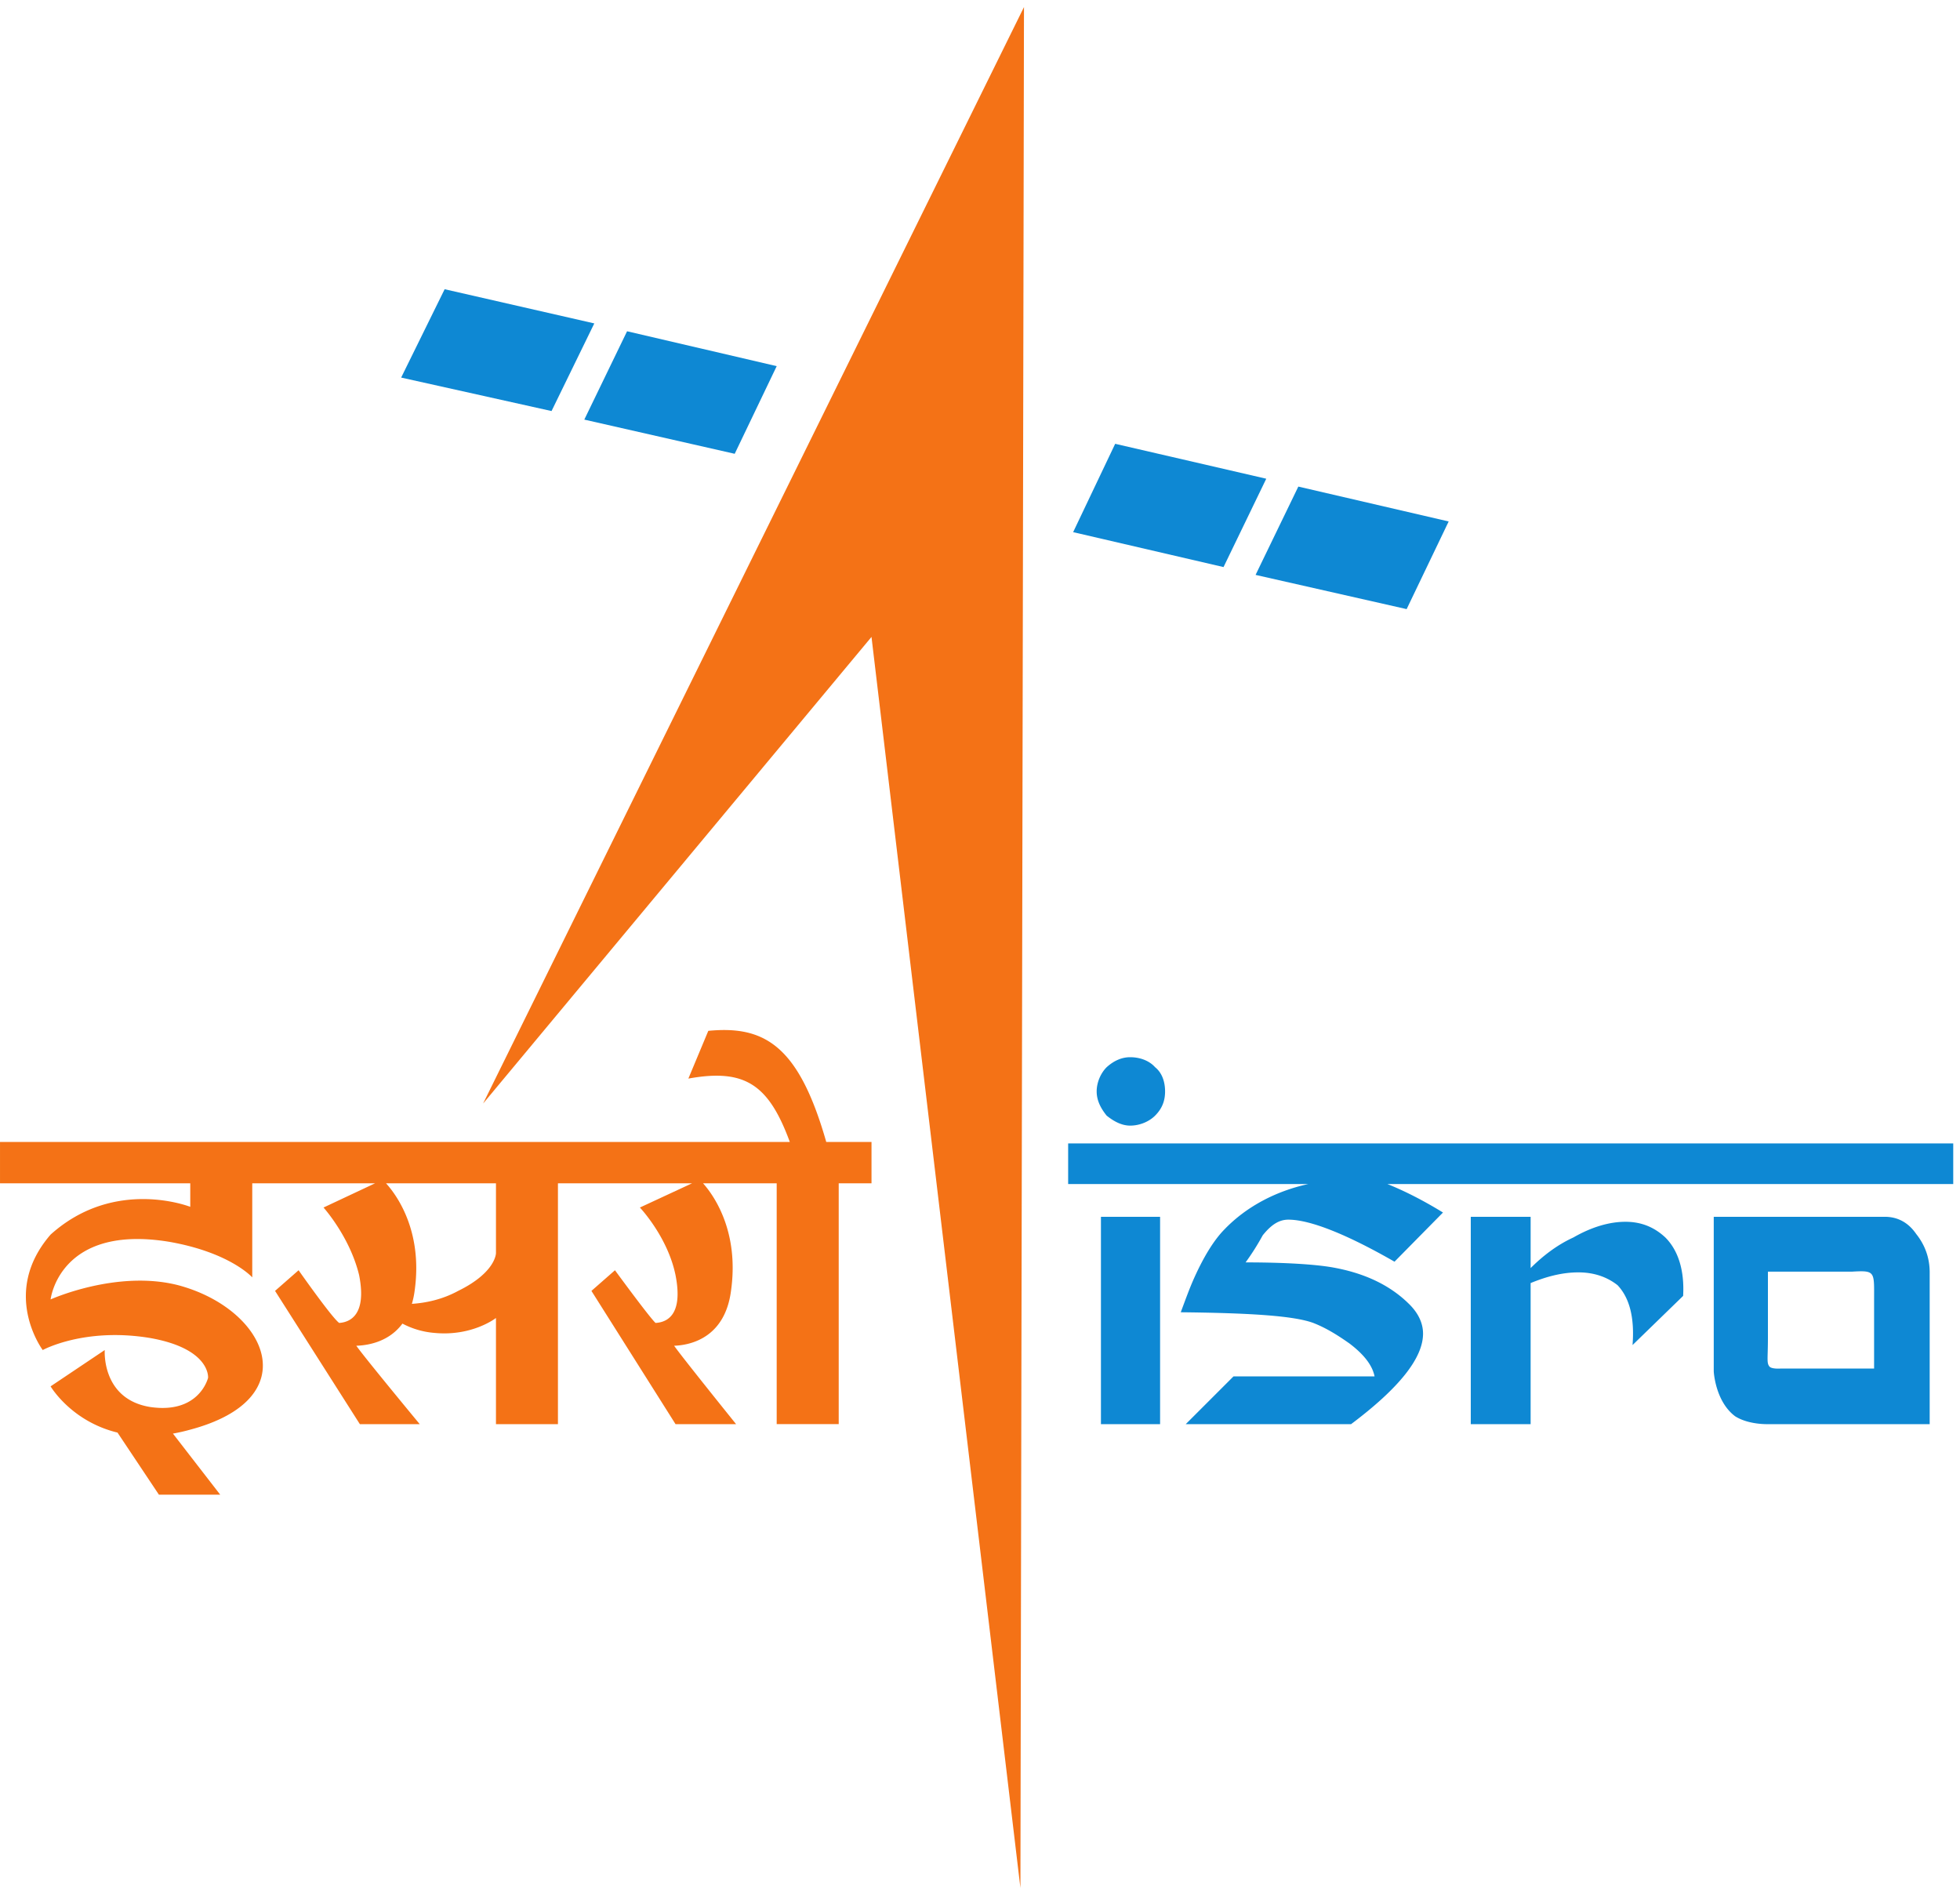 Indian Space Research Organisation (ISRO) logo colors